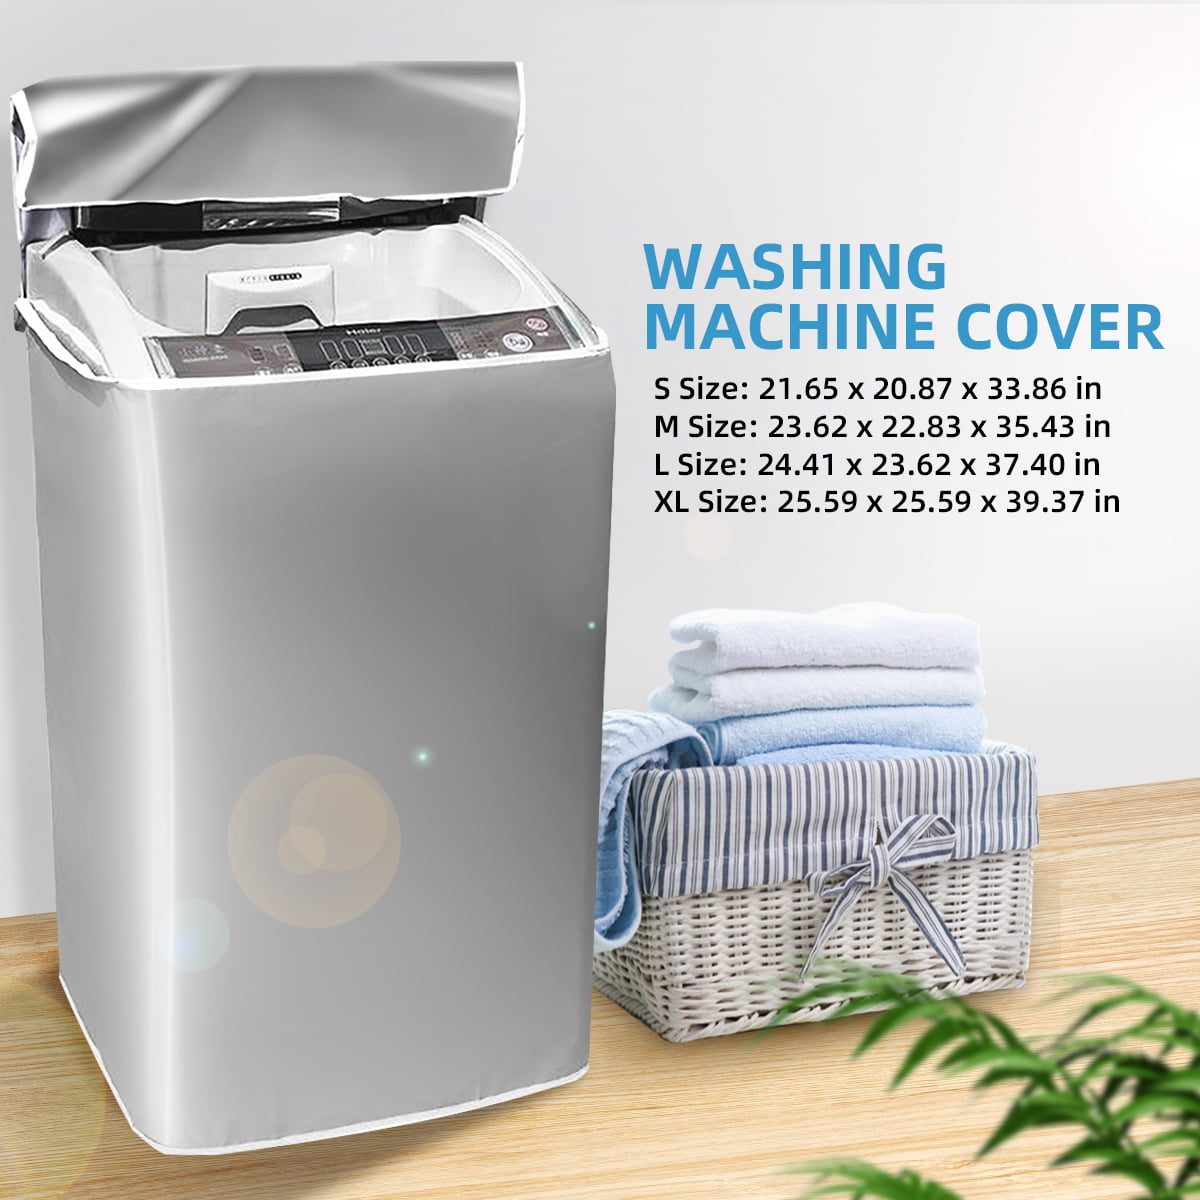 Washing Machine Laundry Cover Automatic Dustproof Sunscreen Waterproof Protector 